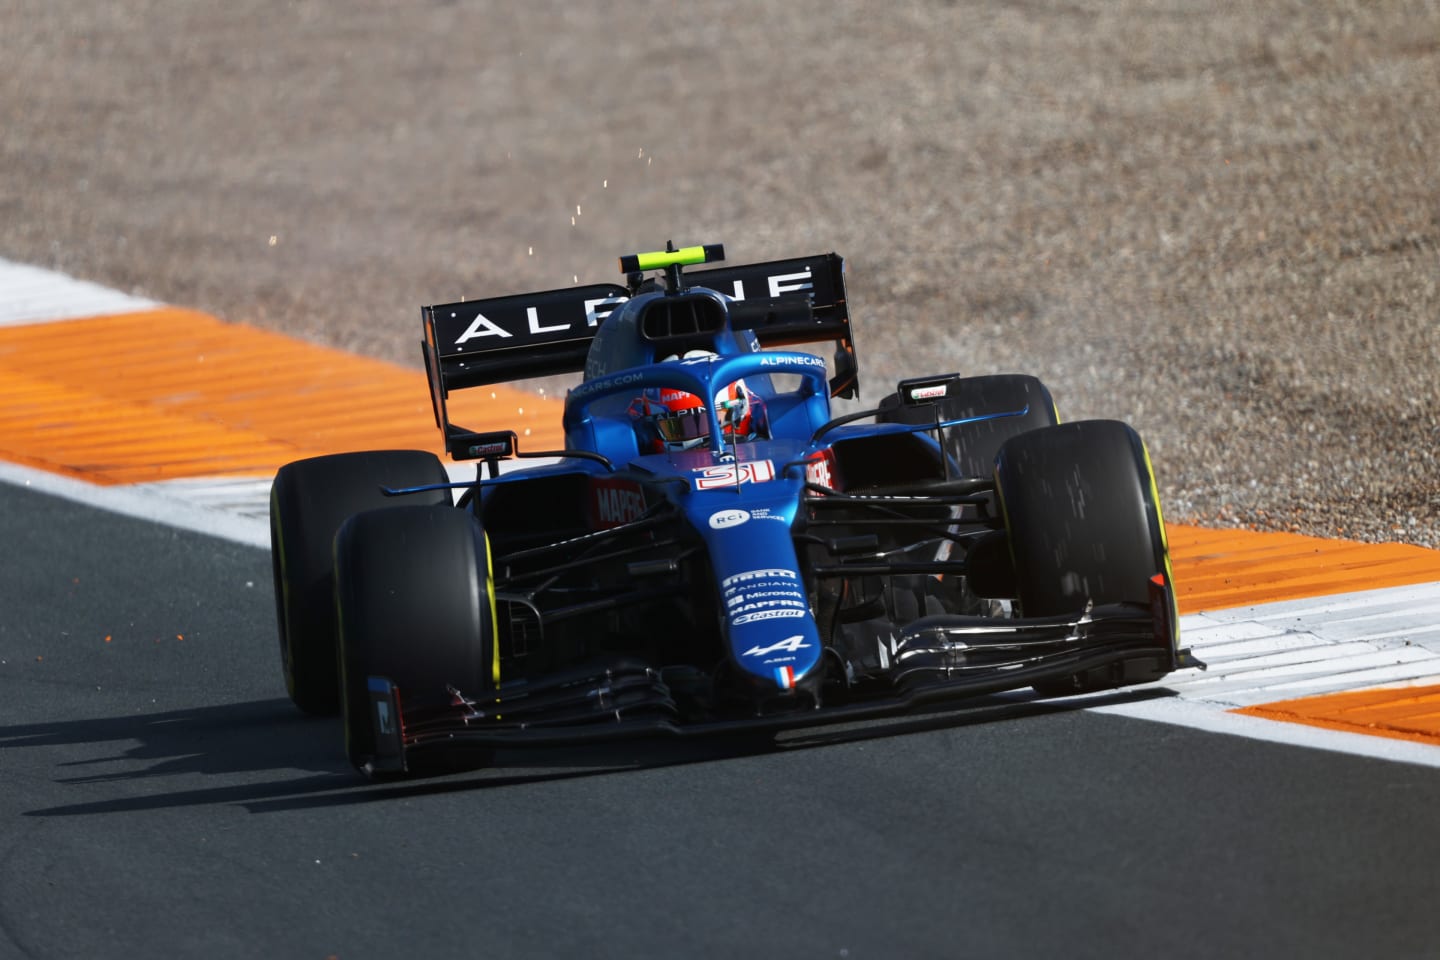 ZANDVOORT, NETHERLANDS - SEPTEMBER 03: Esteban Ocon of France driving the (31) Alpine A521 Renault during practice ahead of the F1 Grand Prix of The Netherlands at Circuit Zandvoort on September 03, 2021 in Zandvoort, Netherlands. (Photo by Bryn Lennon/Getty Images)